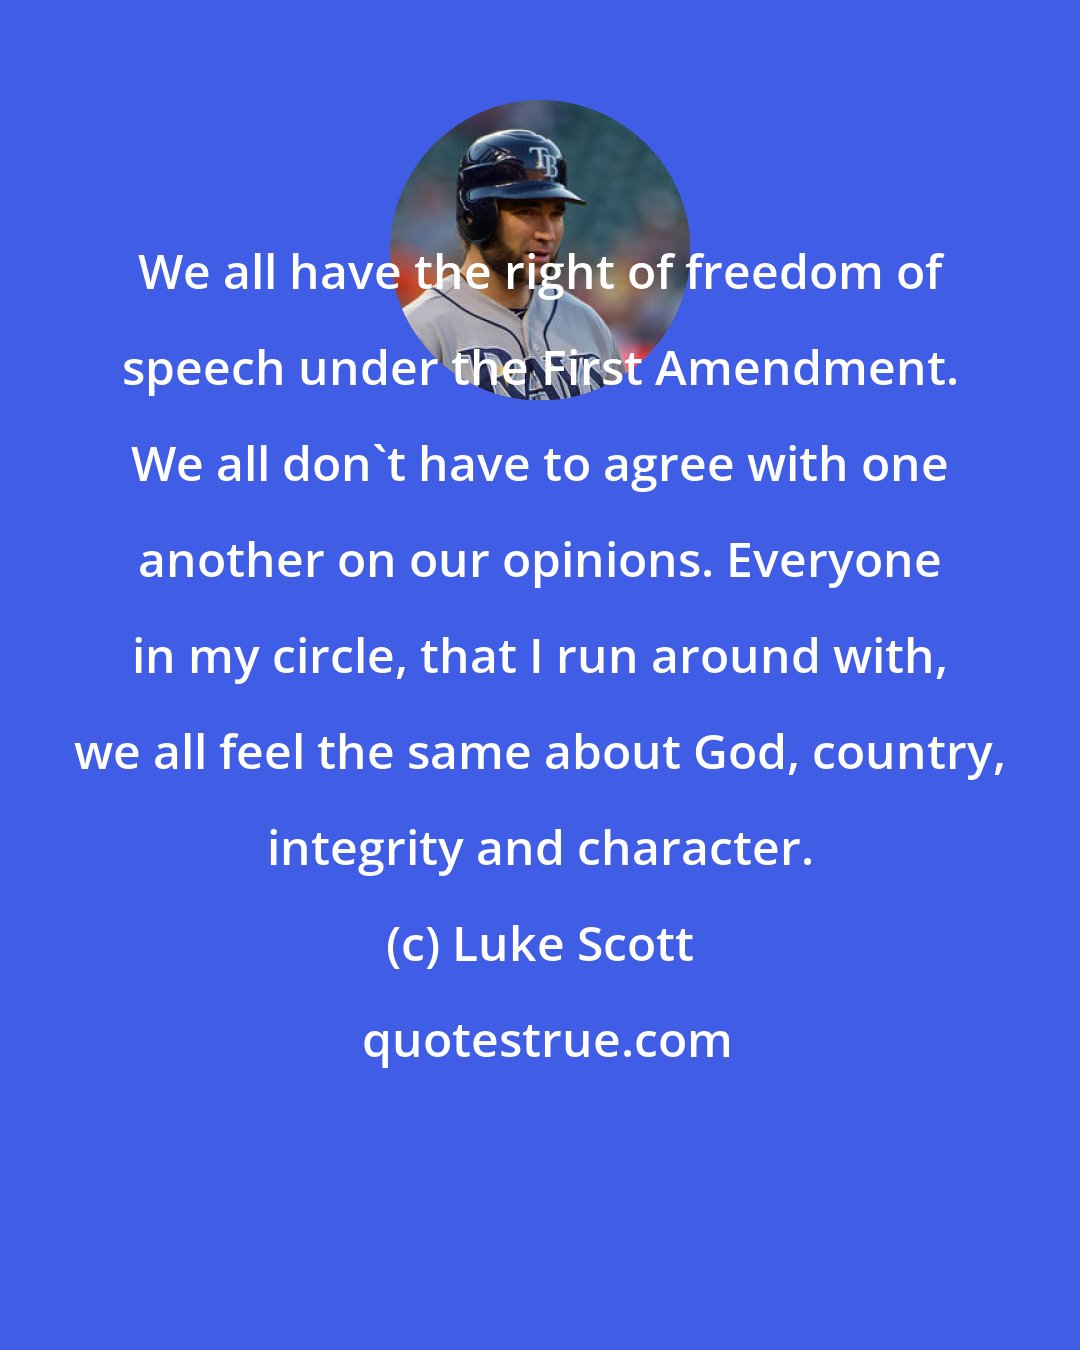 Luke Scott: We all have the right of freedom of speech under the First Amendment. We all don't have to agree with one another on our opinions. Everyone in my circle, that I run around with, we all feel the same about God, country, integrity and character.